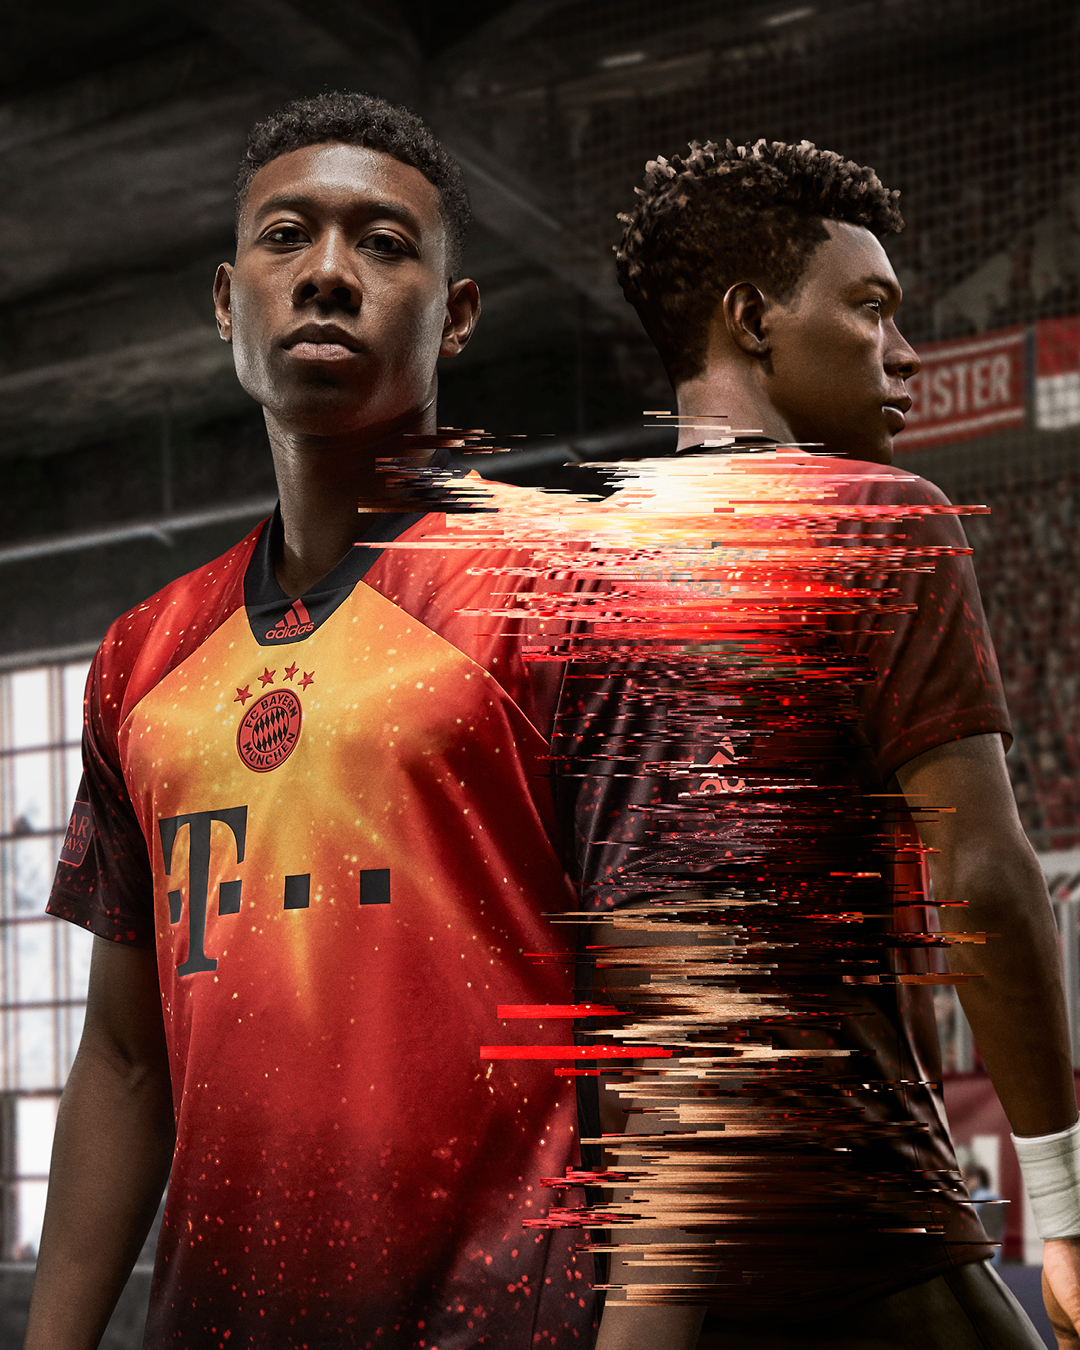 fifa 19 limited edition jersey